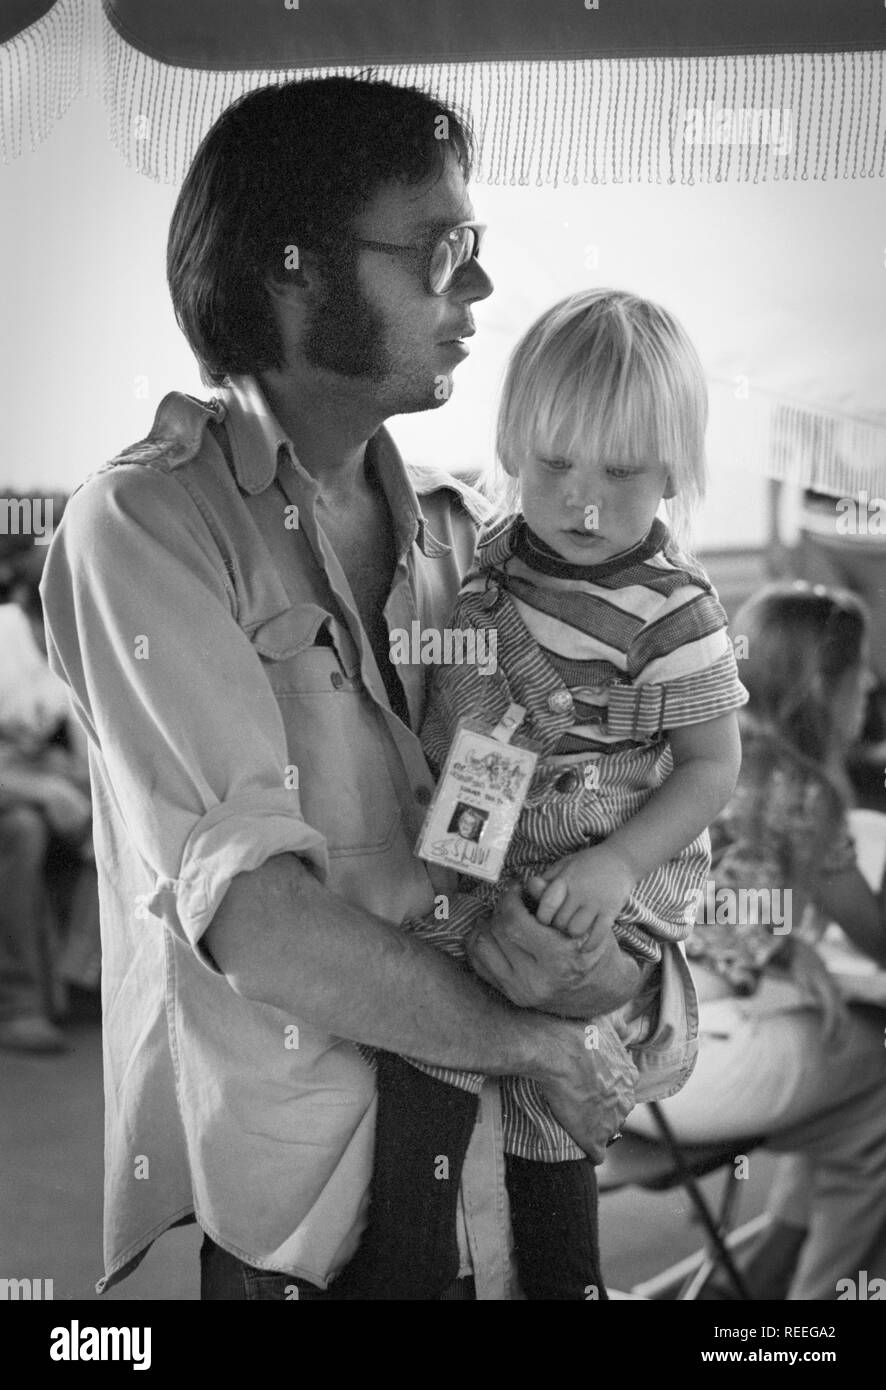 OAKLAND, USA - JULY 14: Neil Young with child Amber posed backstage at Oakland Stadium, California on July 14 1974 during the Crosby, Stills, Nash & Young 1974 US Tour (photo by Gijsbert Hanekroot) Stock Photo